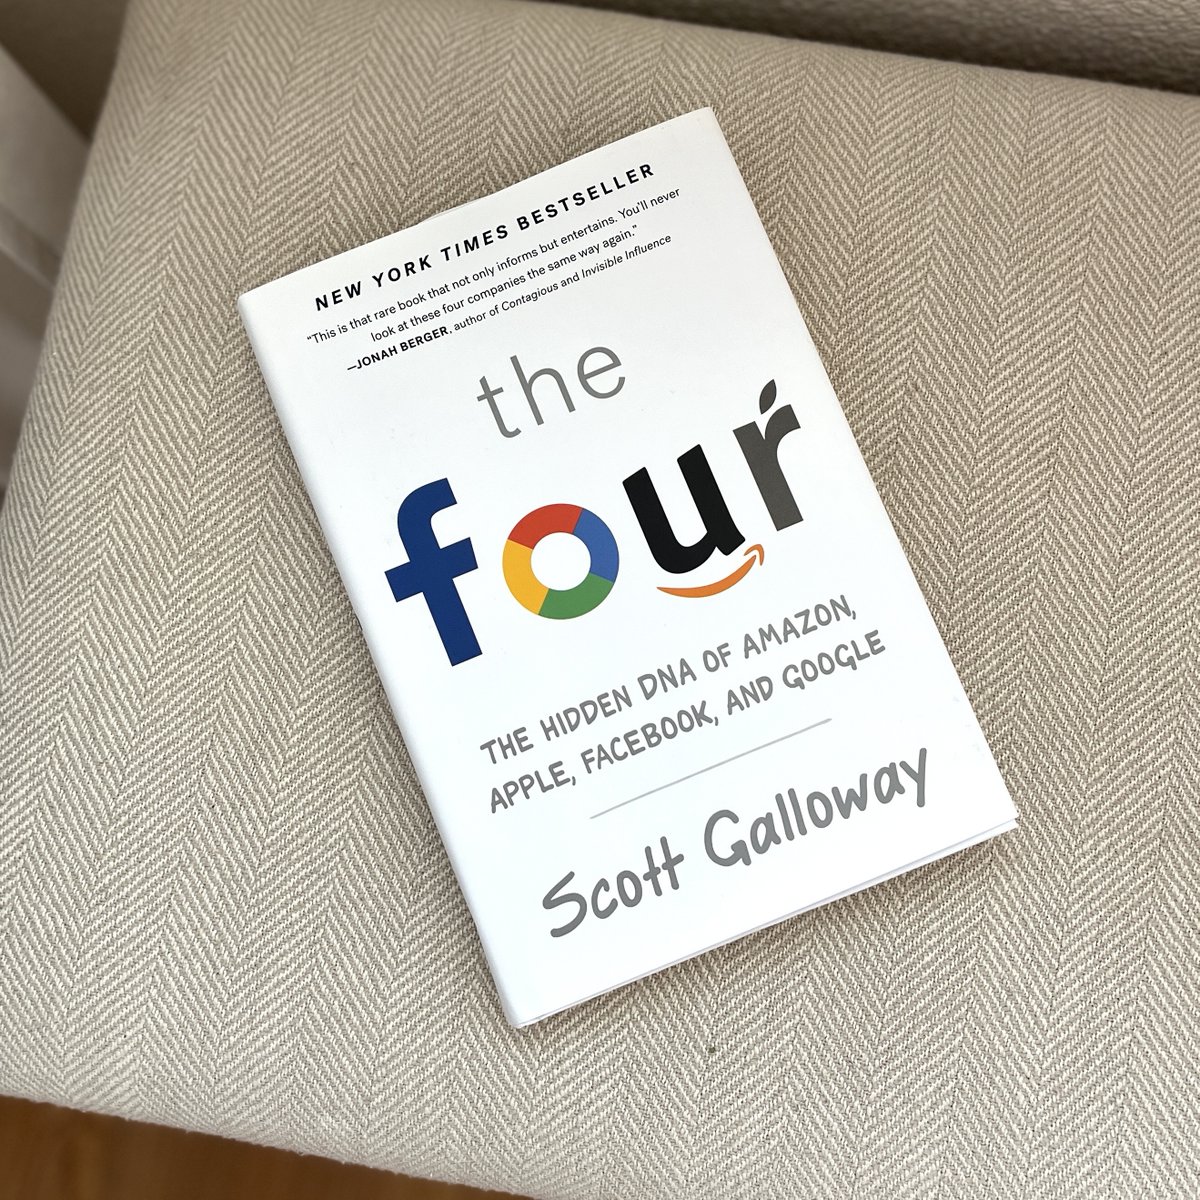 Everyone knows THE FOUR: Amazon, Apple, Facebook, and Google. But do you know the true extent of their power and success? Bestselling author @profgalloway deconstructs their business strategies in his book and teaches you to apply their tactics to your own career. 💡